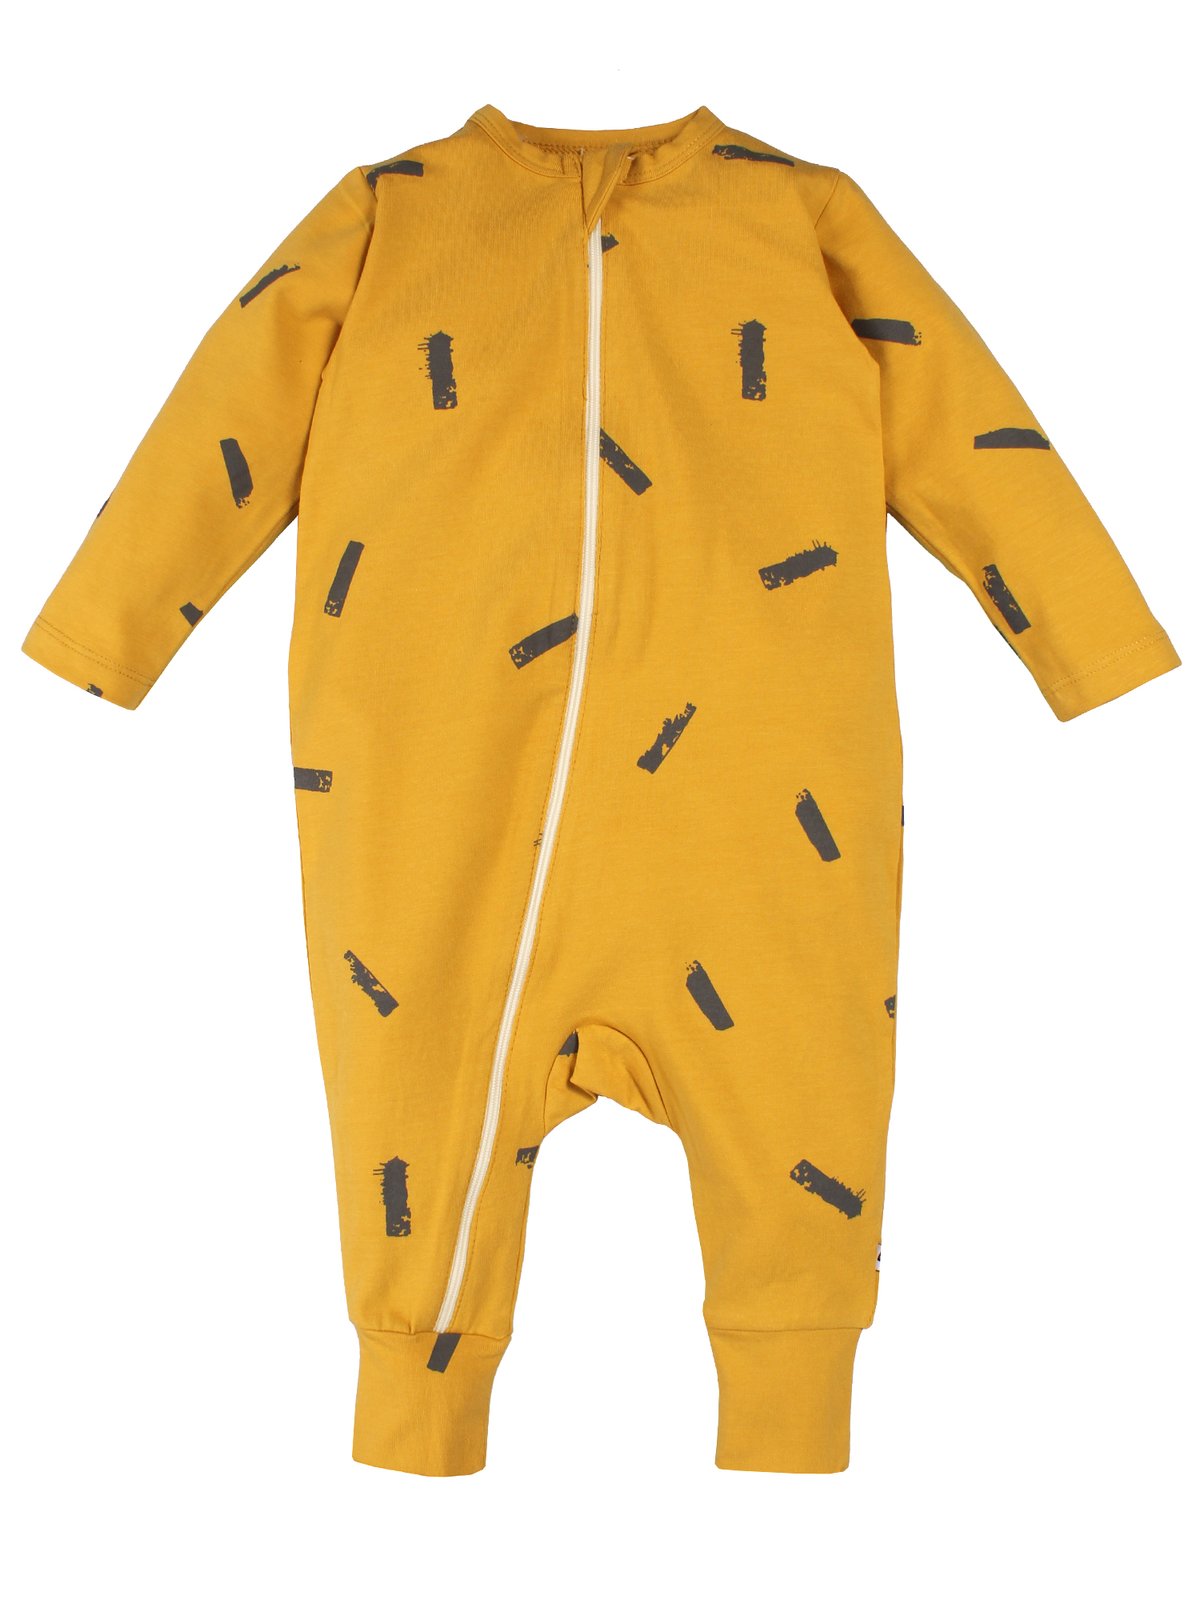 Organic Cotton Long Sleeve Mustard Color Romper For Unisex Baby